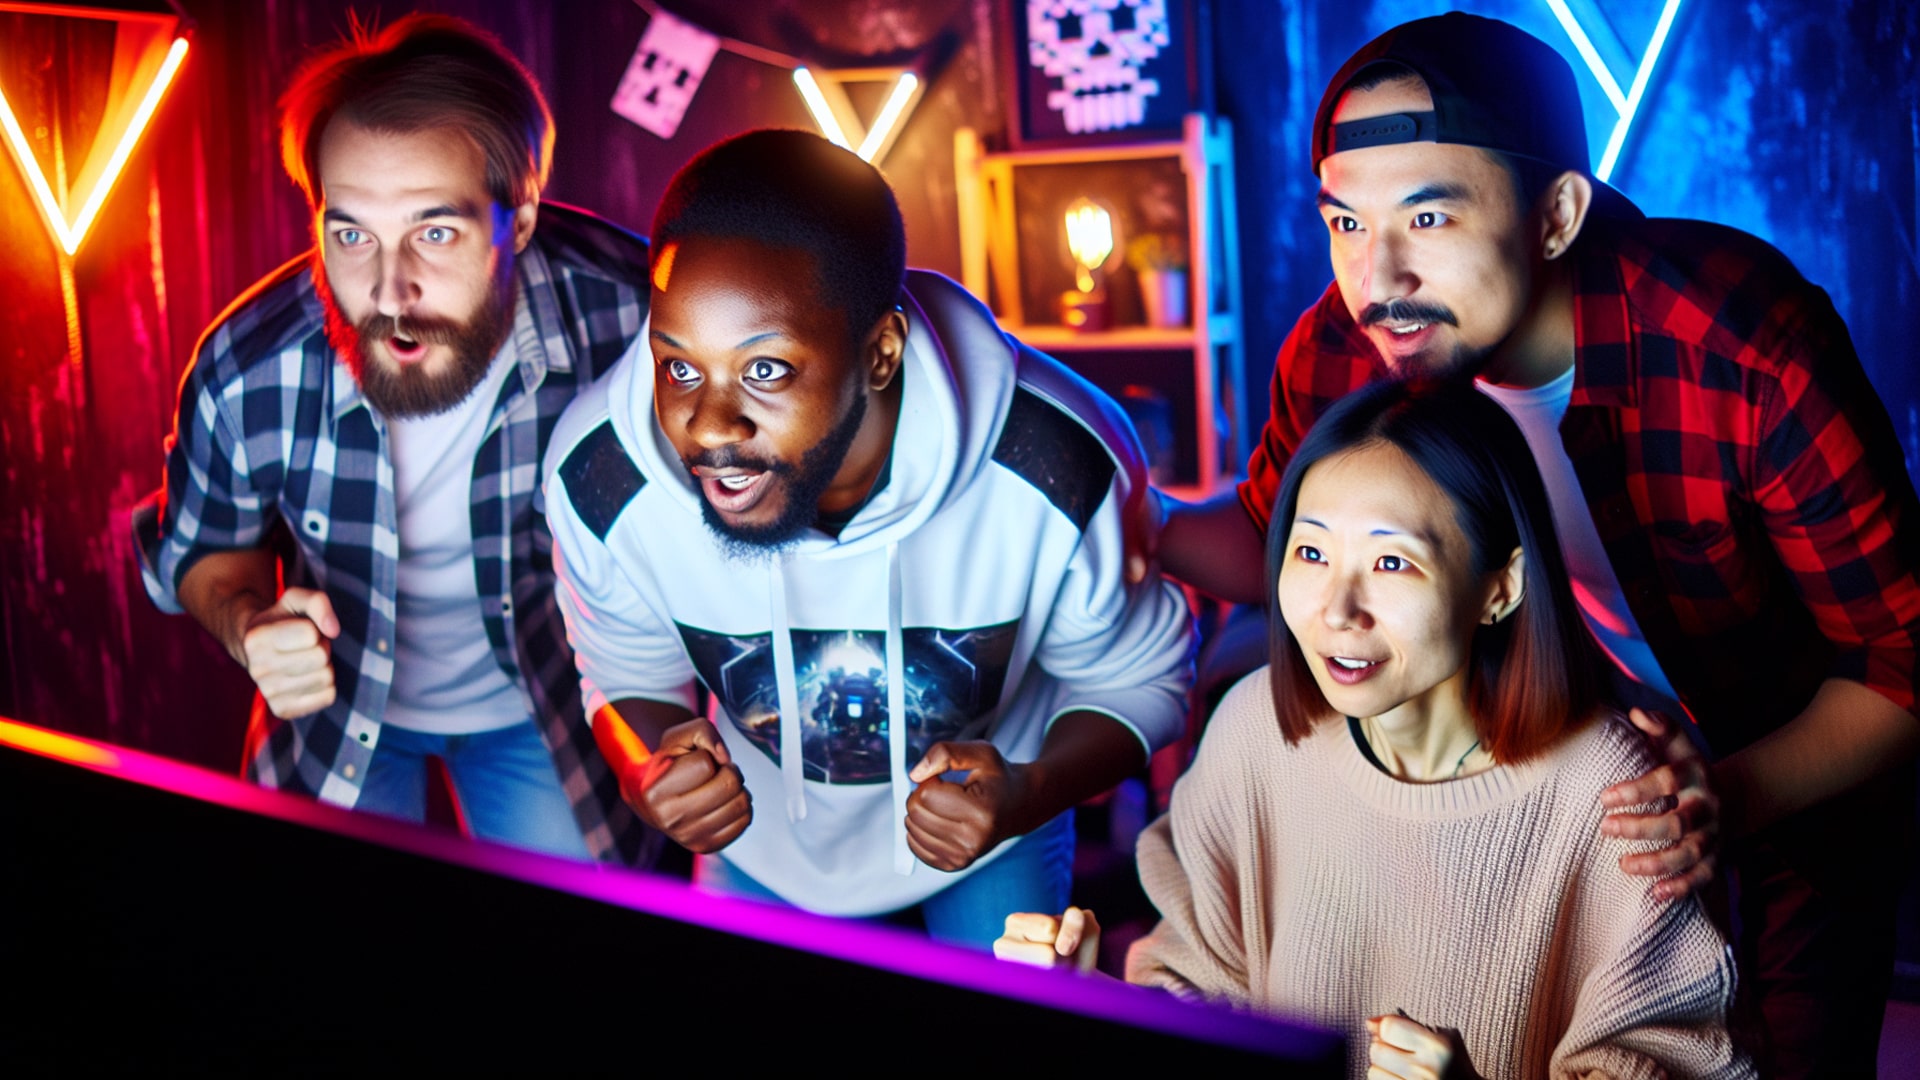 A diverse group of gamers enjoying a gaming event, illustrating the community aspect of gaming